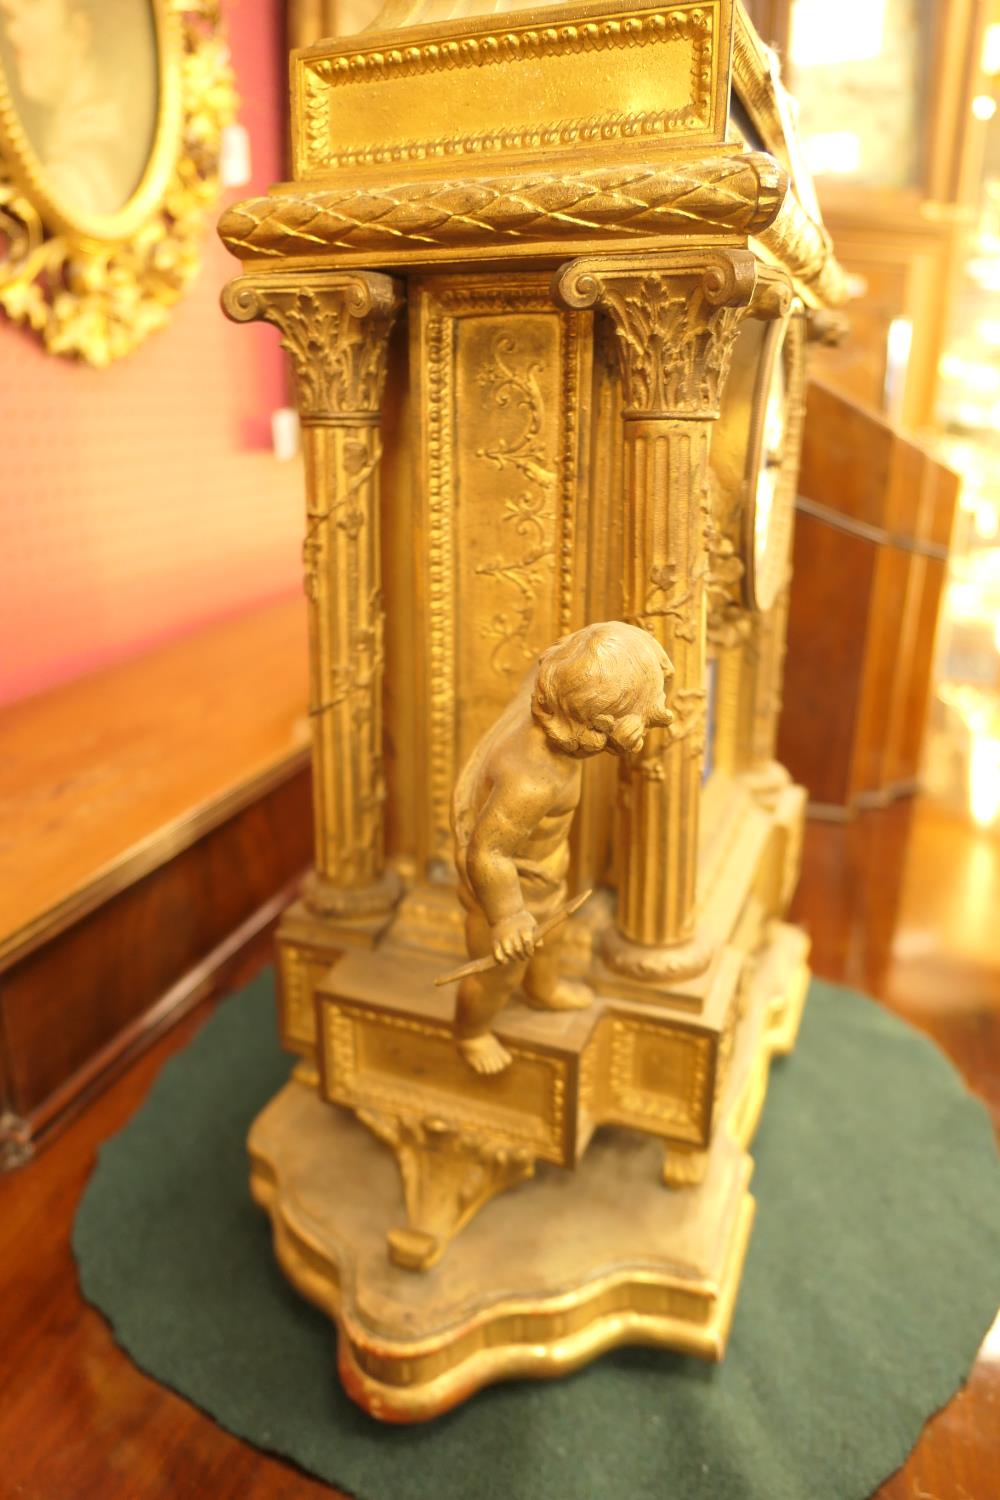 French gilt ormolu mantel clock, late 19th Century, surmounted with cherubs holding a flaming urn, - Image 4 of 4